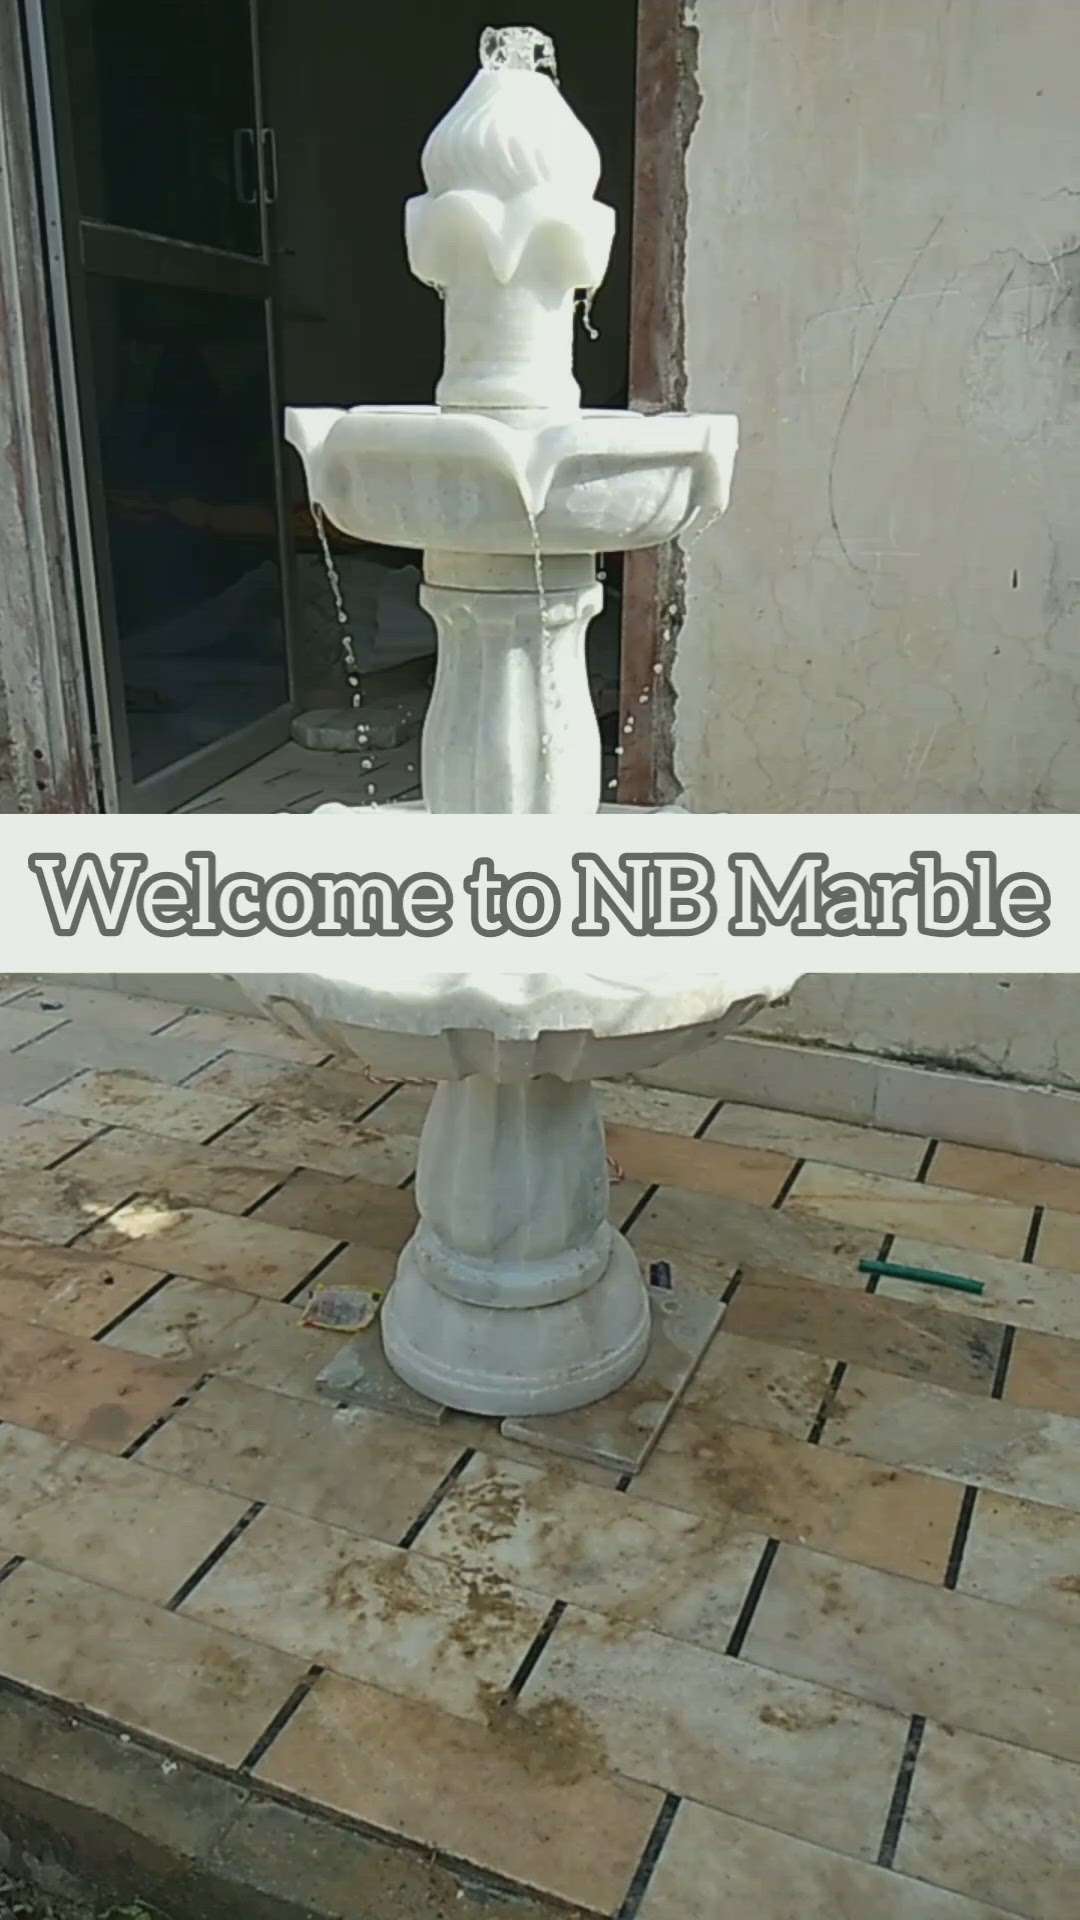 White Marble 2-Tier Stand Fountain

Decor your garden and living area with a beautiful water fountain

We are manufacturer of marble and stone

We make any design according to your requirement and size

More Information Contact Me
8233078099

#fountain #nbmarble #gardendecor #waterfountain #marblefountain #decor #InteriorDesigner #makranamarble #whitemarble  #Marblequarry #marbleshowroom